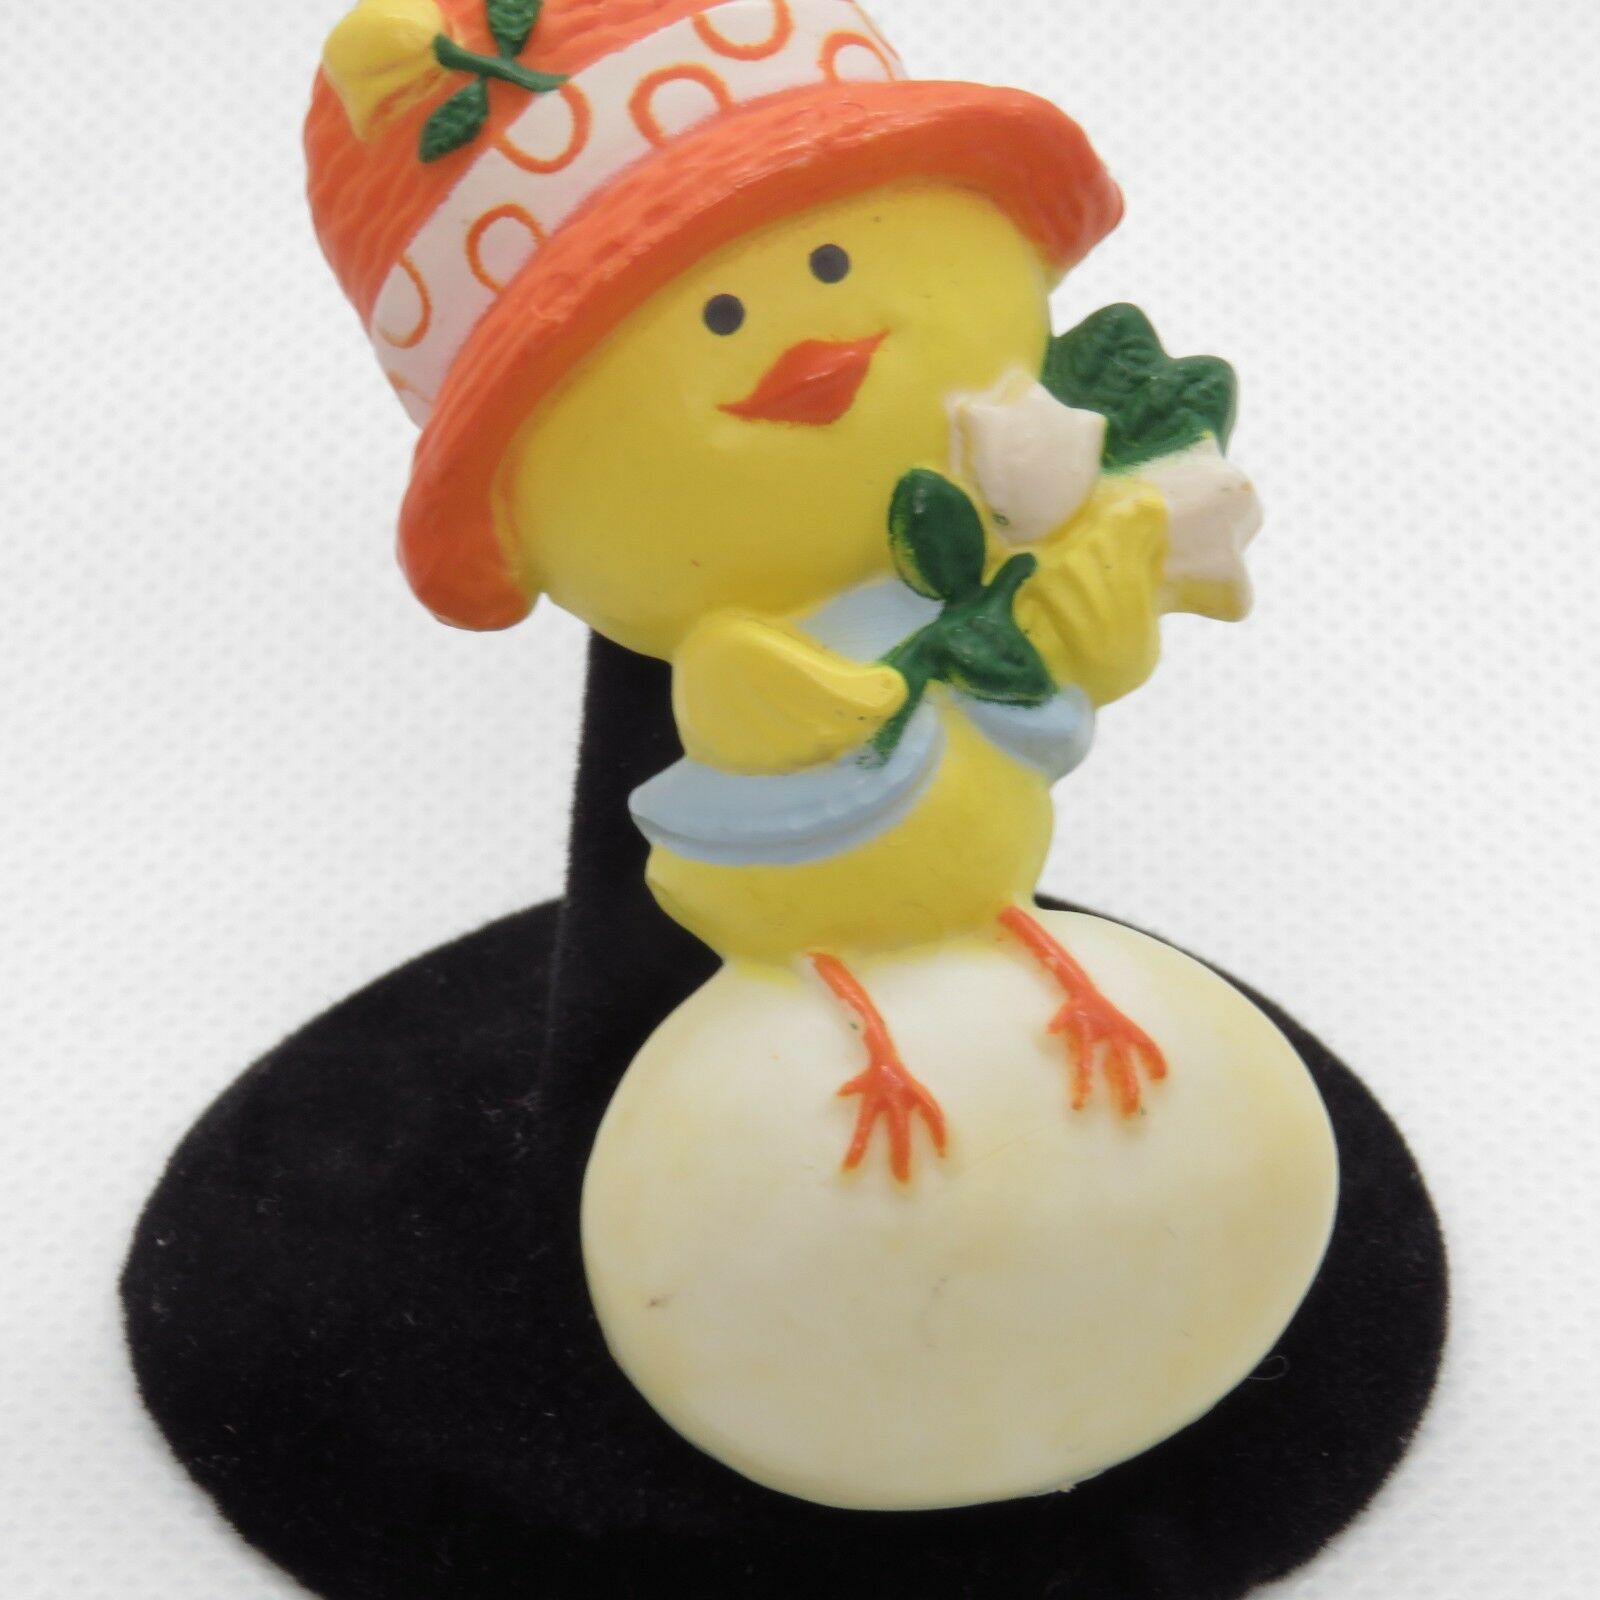 Chick Chicken Egg Easter Pin Brooch Hallmark Vintage 1975 Bonnet Jewelry - At Grandma's Table